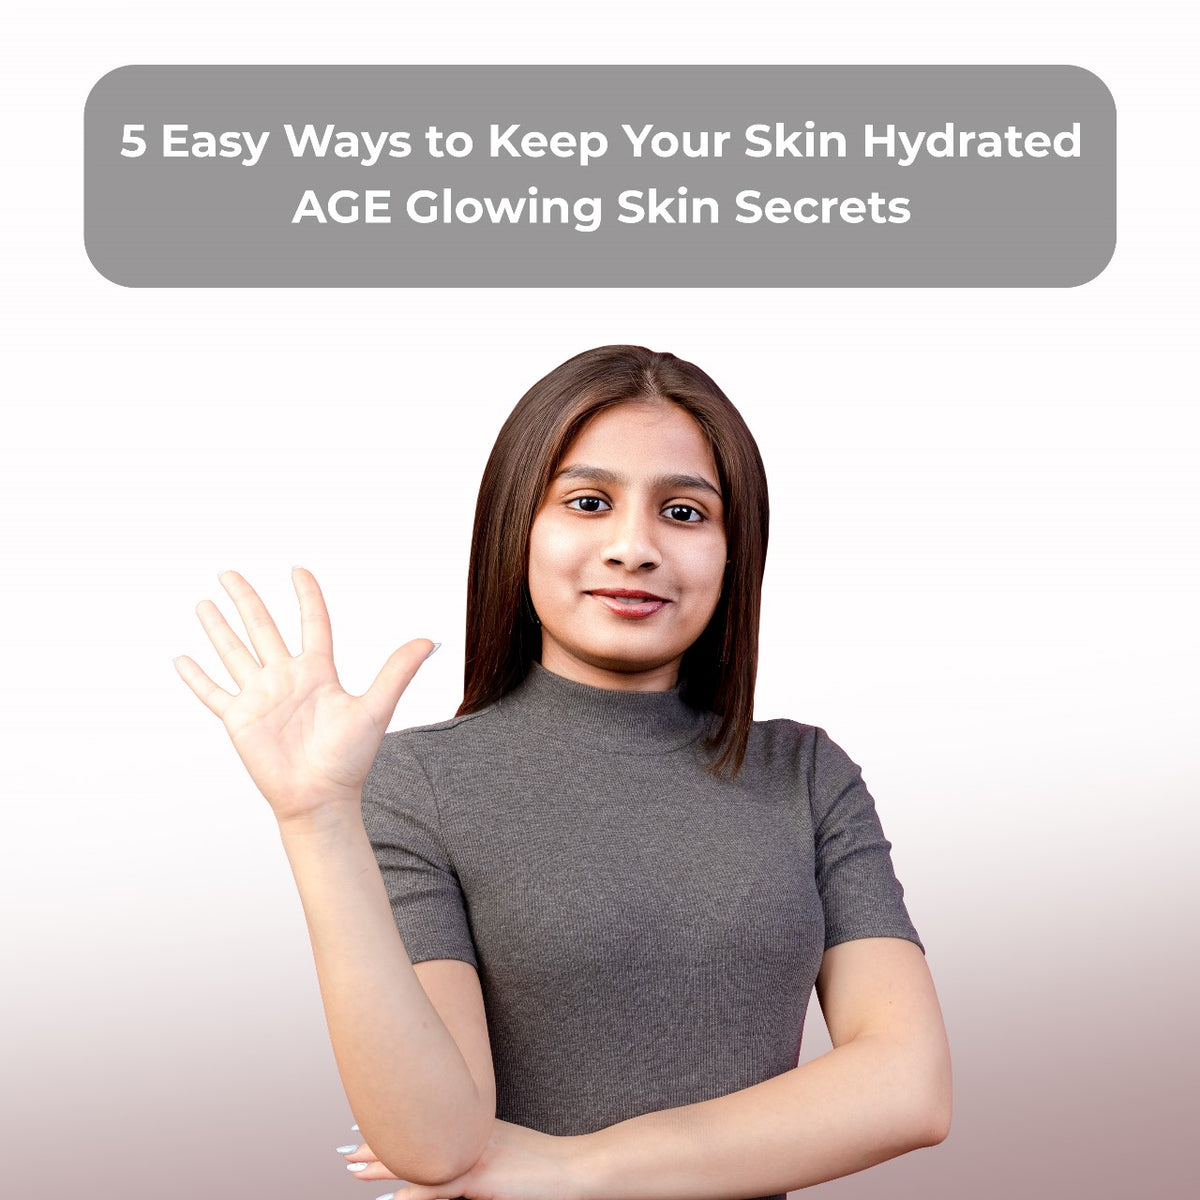 5-easy-ways-to-keep-your-skin-hydrated-age-glowing-skin-secrets